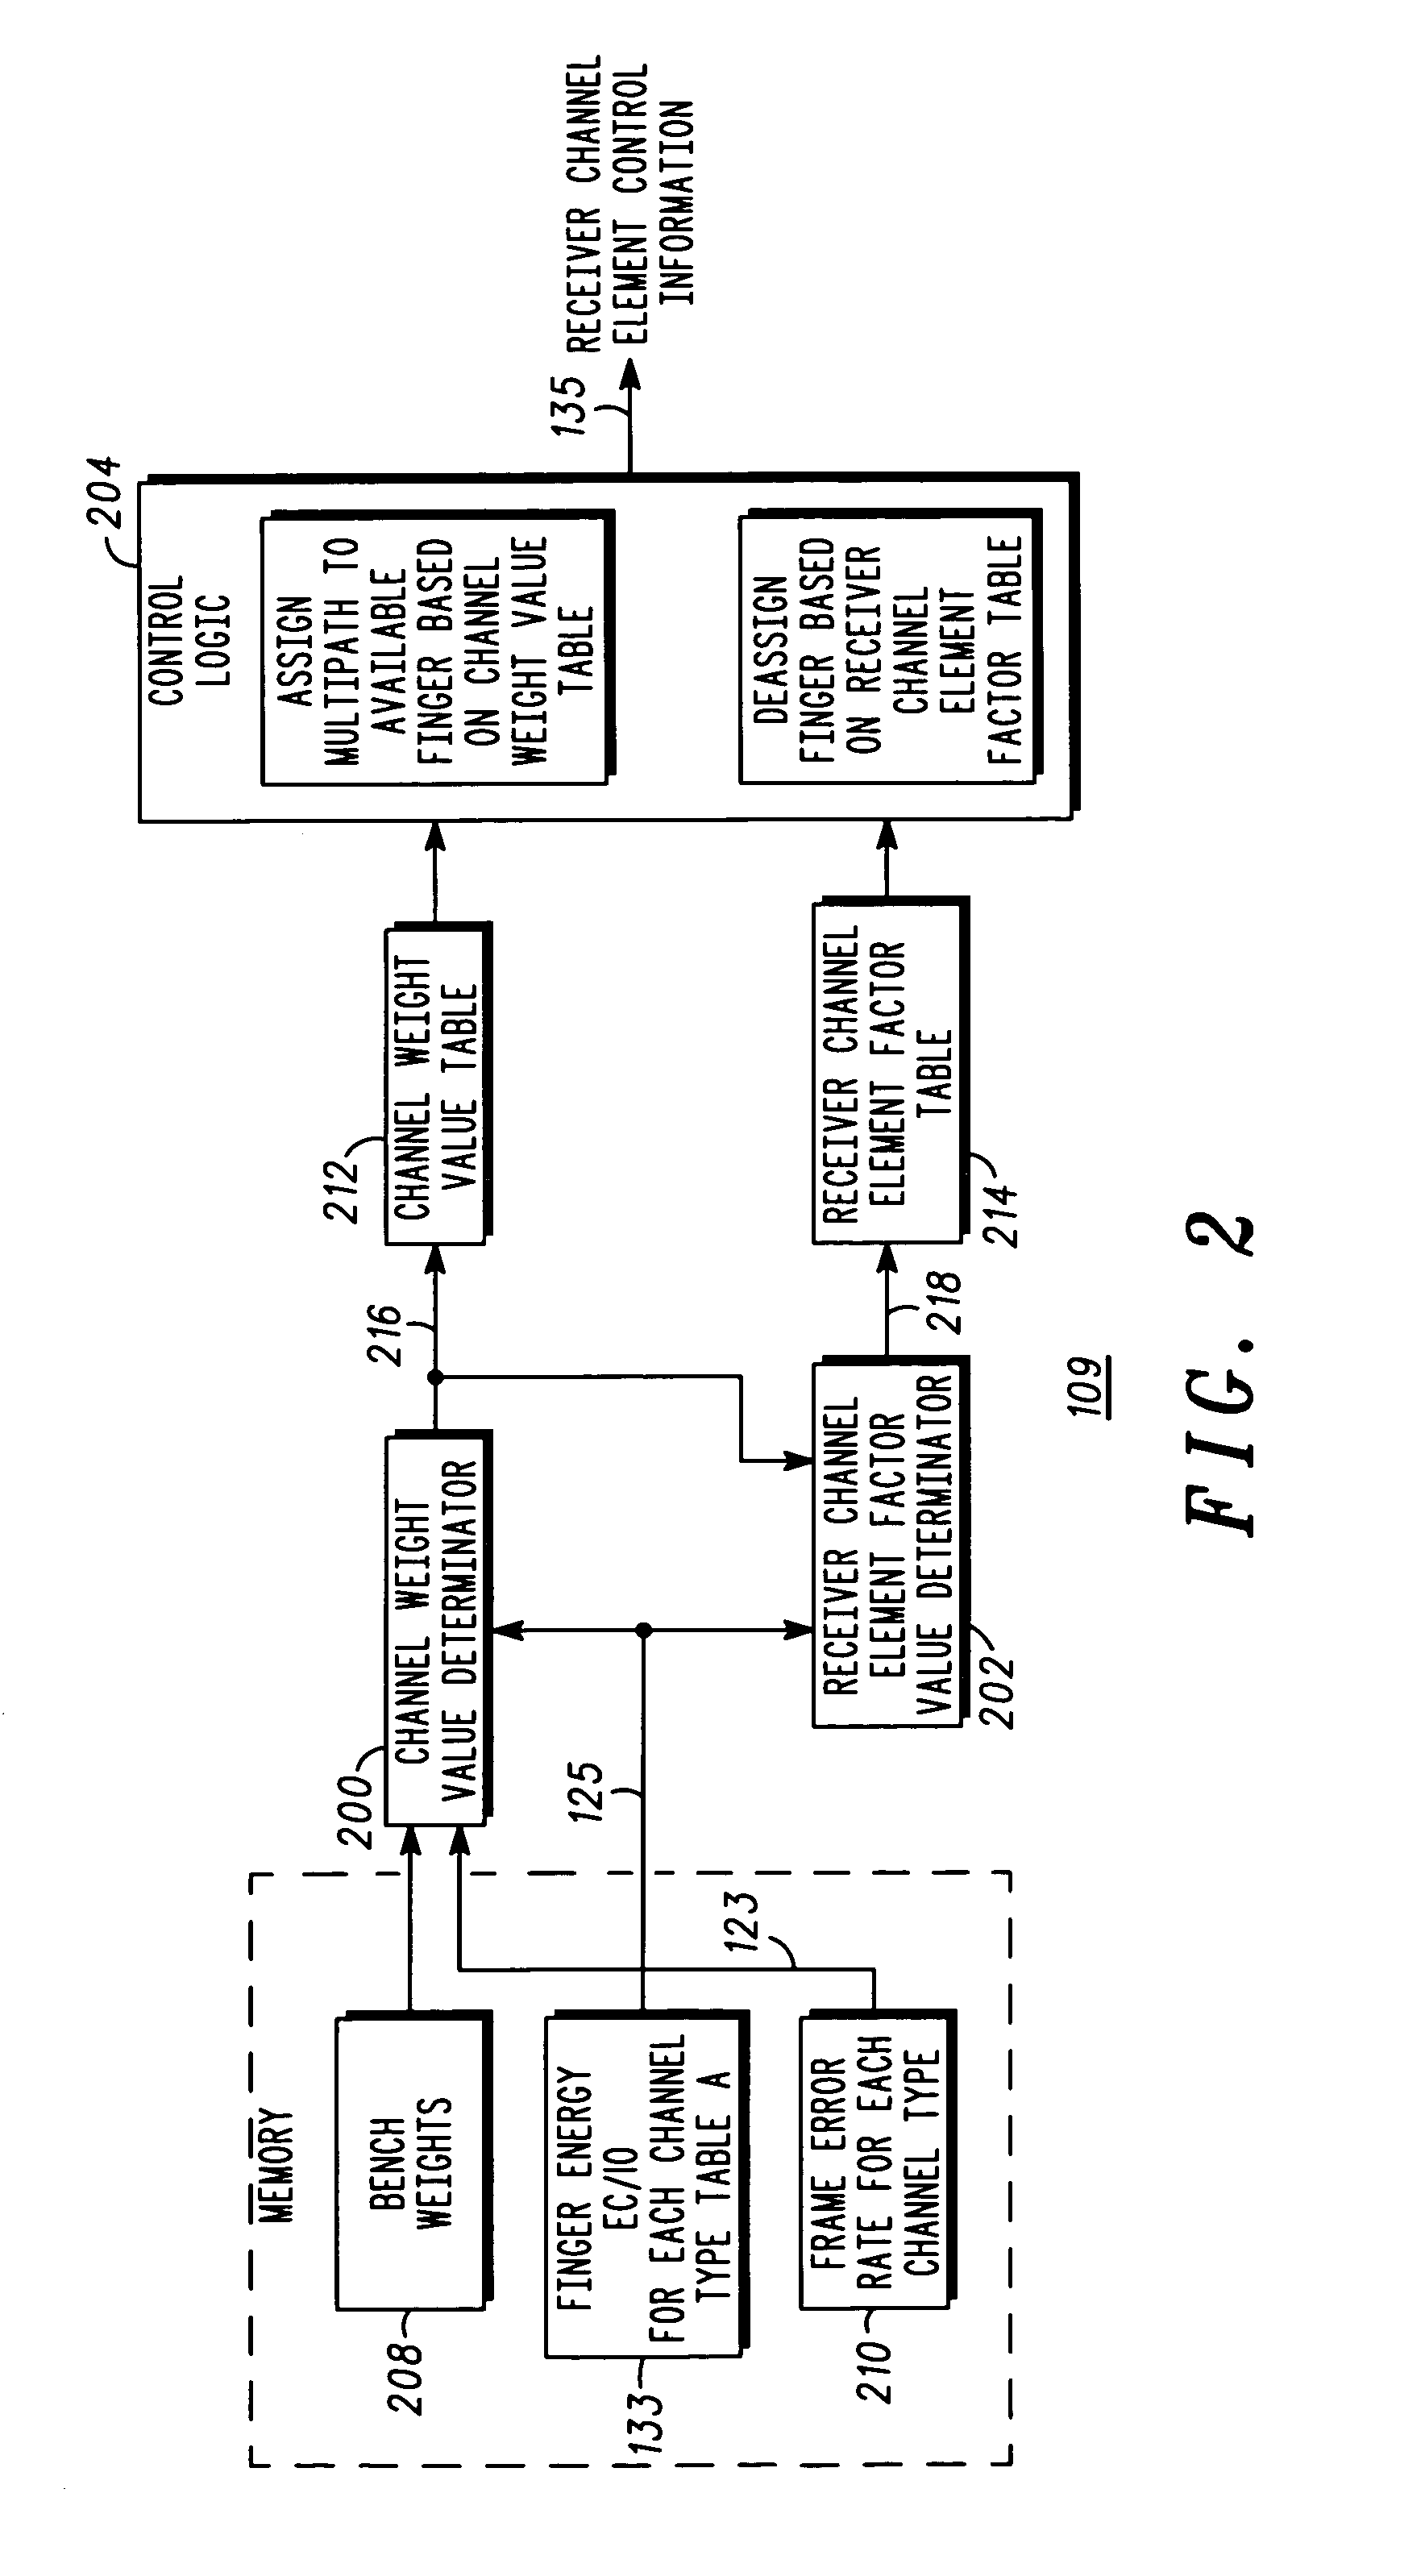 Apparatus for controlling a plurality of receiver fingers in a CDMA receiver